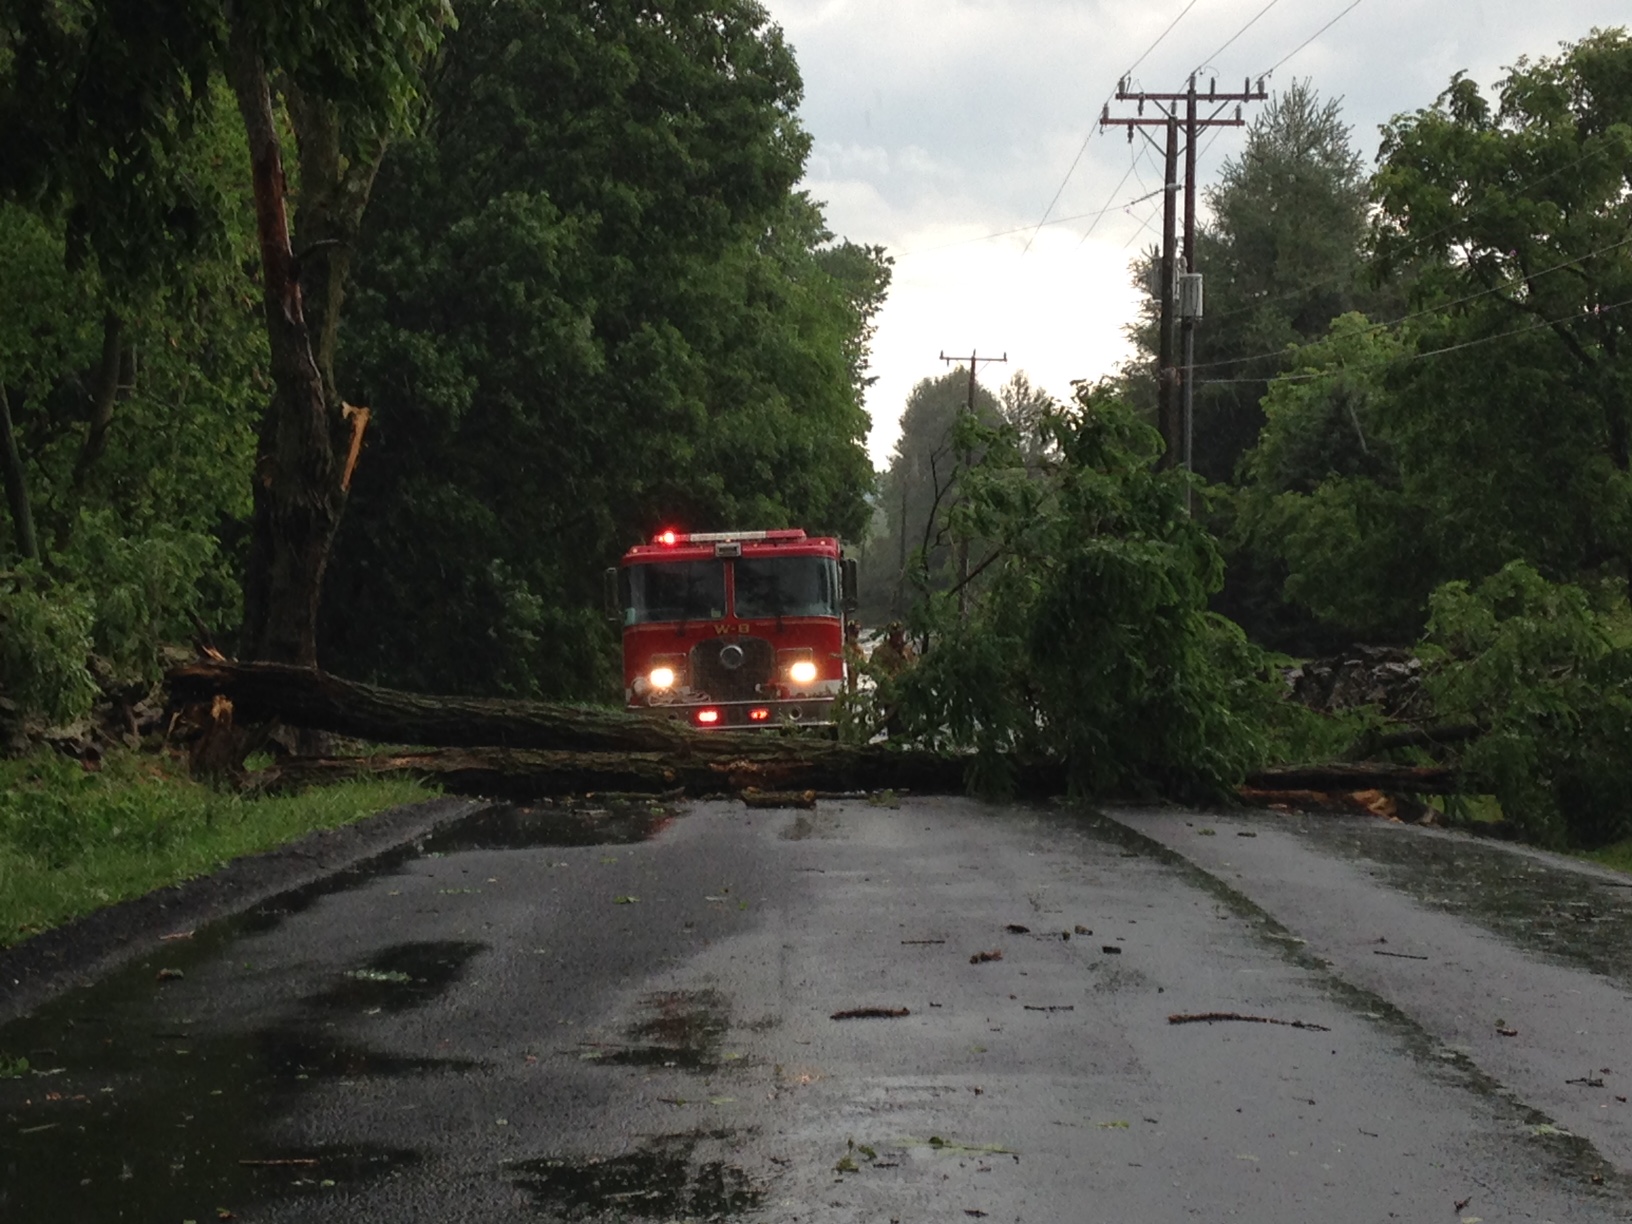 Storm damage in the area of Snickersville Turnpike on June 21, 2016. (Courtesy Jessie McQuillen)